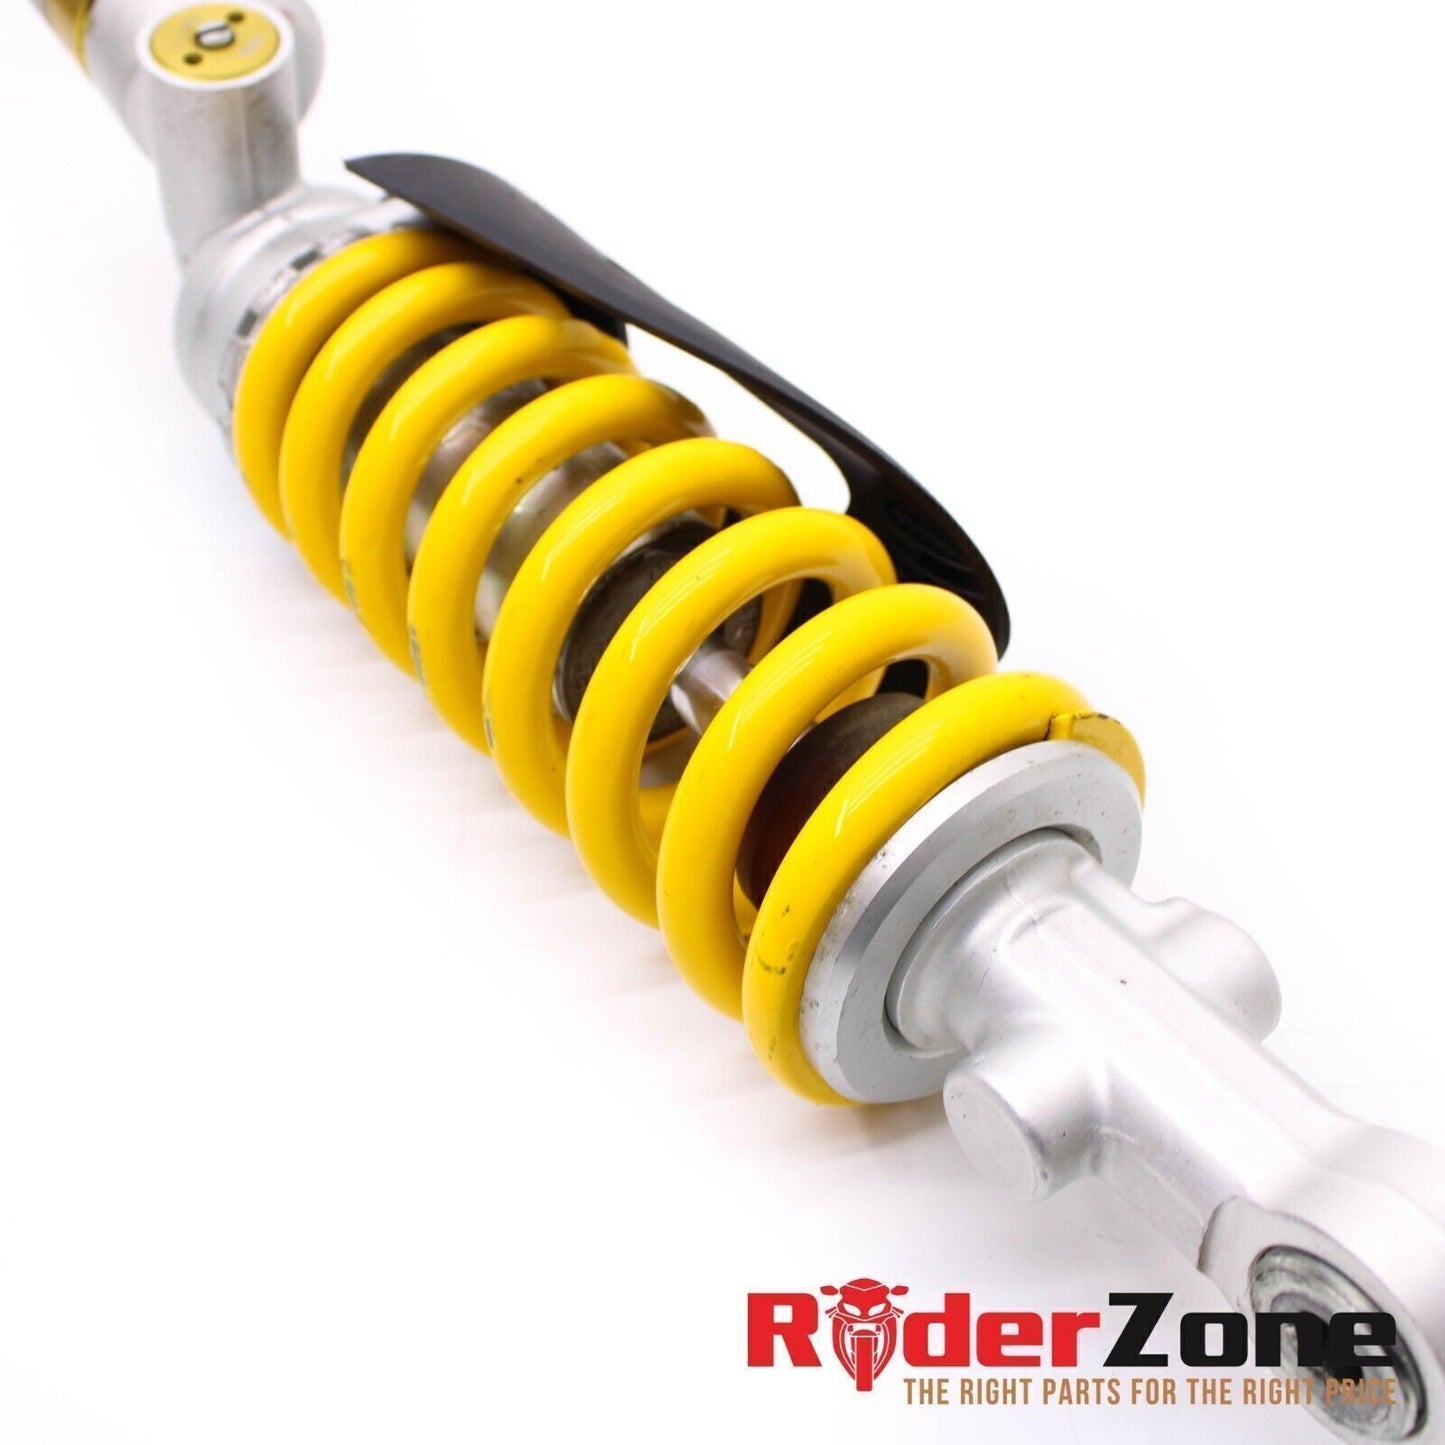 2020 - 2022 DUCATI PANIGALE V2 SHOCK BACK SUSPENSION YELLOW REAR SPRING STOCK